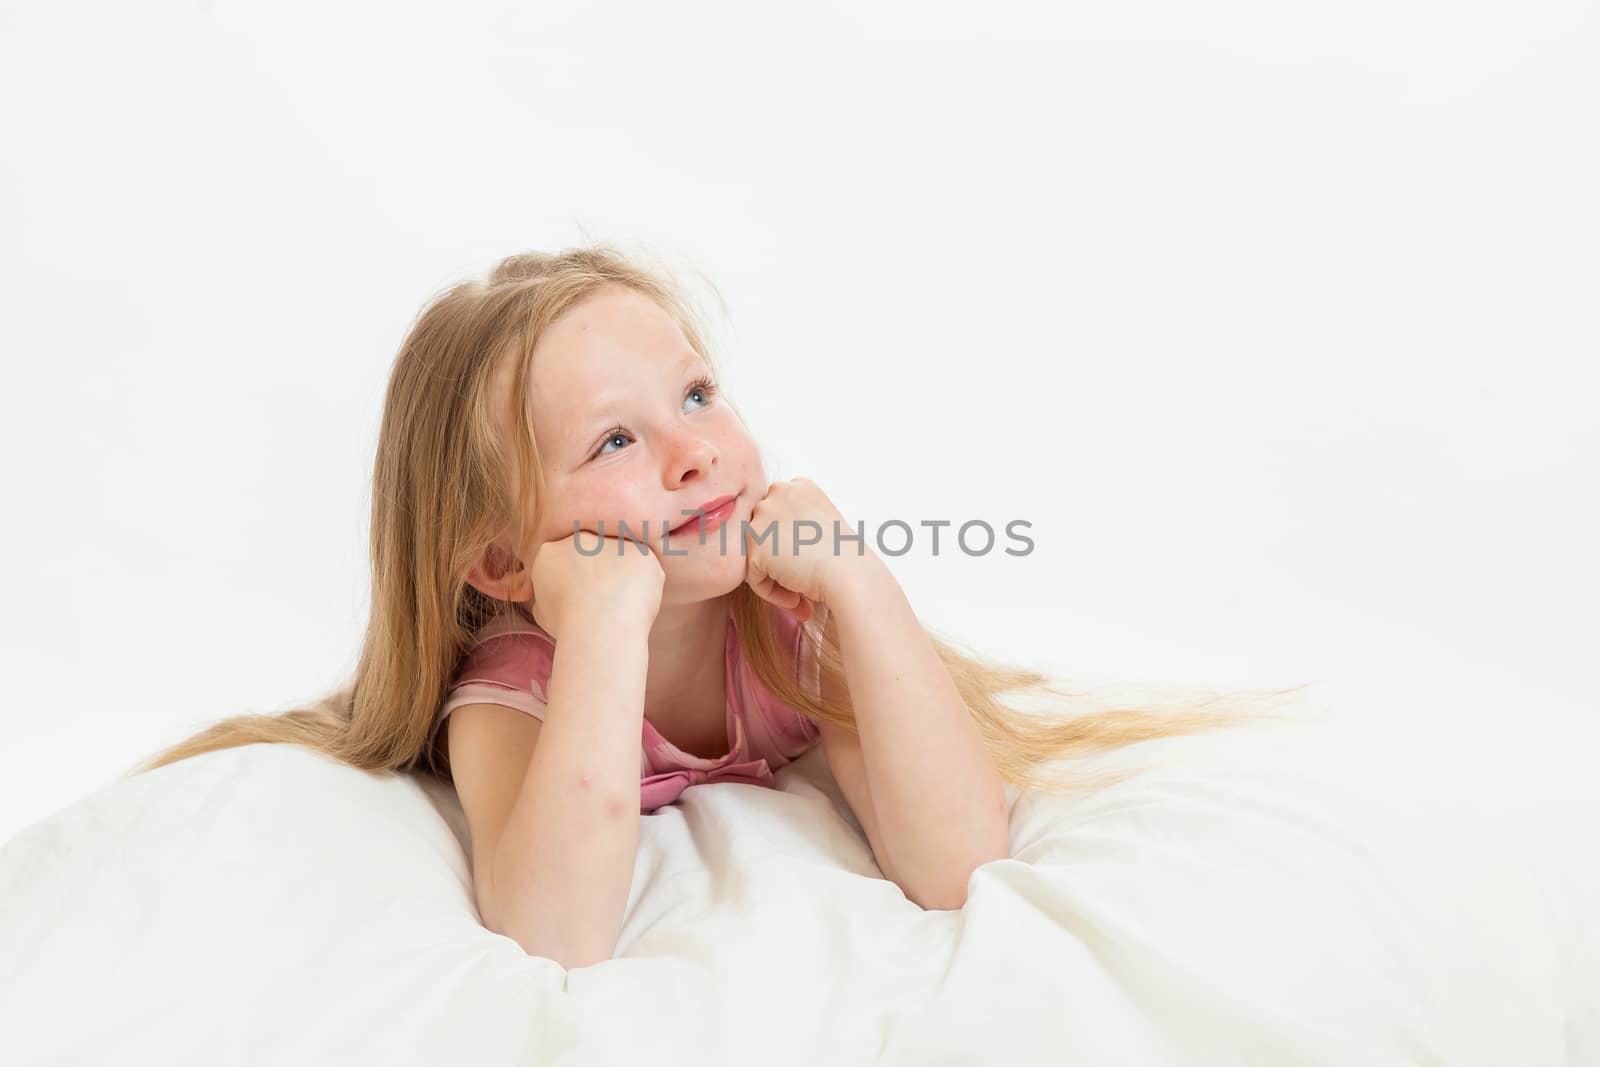 the beautiful little girl on the isolated background